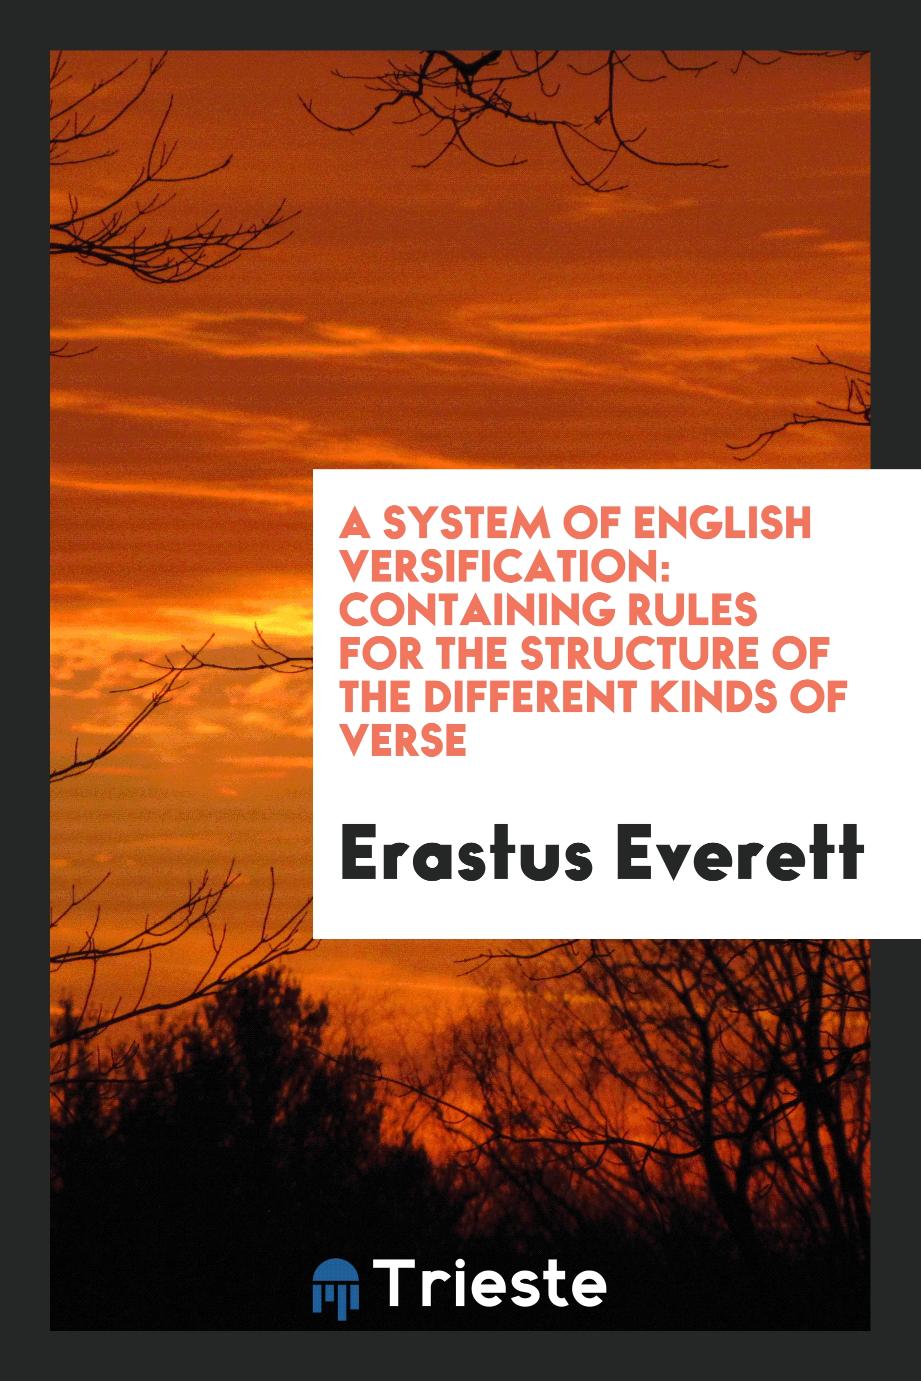 A system of English versification: containing rules for the structure of the different kinds of verse